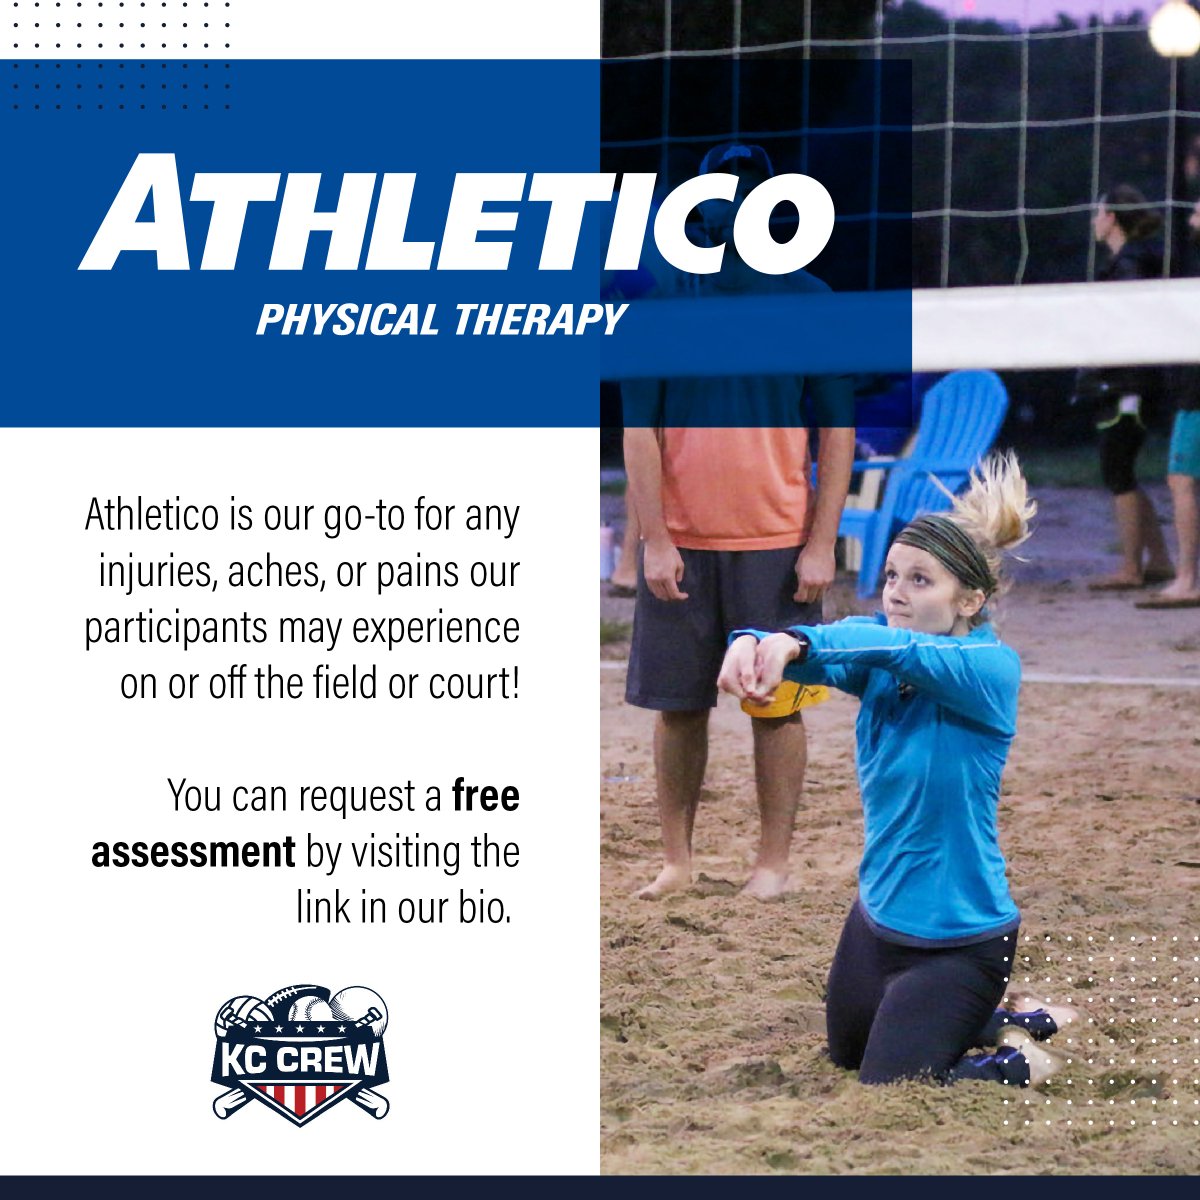 Are you in pain and not sure why? As the Official Provider of Physical Therapy for KC Crew, Athletico is our go-to for any injuries, aches, or pains our participants experience on or off the field or court. To request a free assessment, click here: bit.ly/3wANlHE